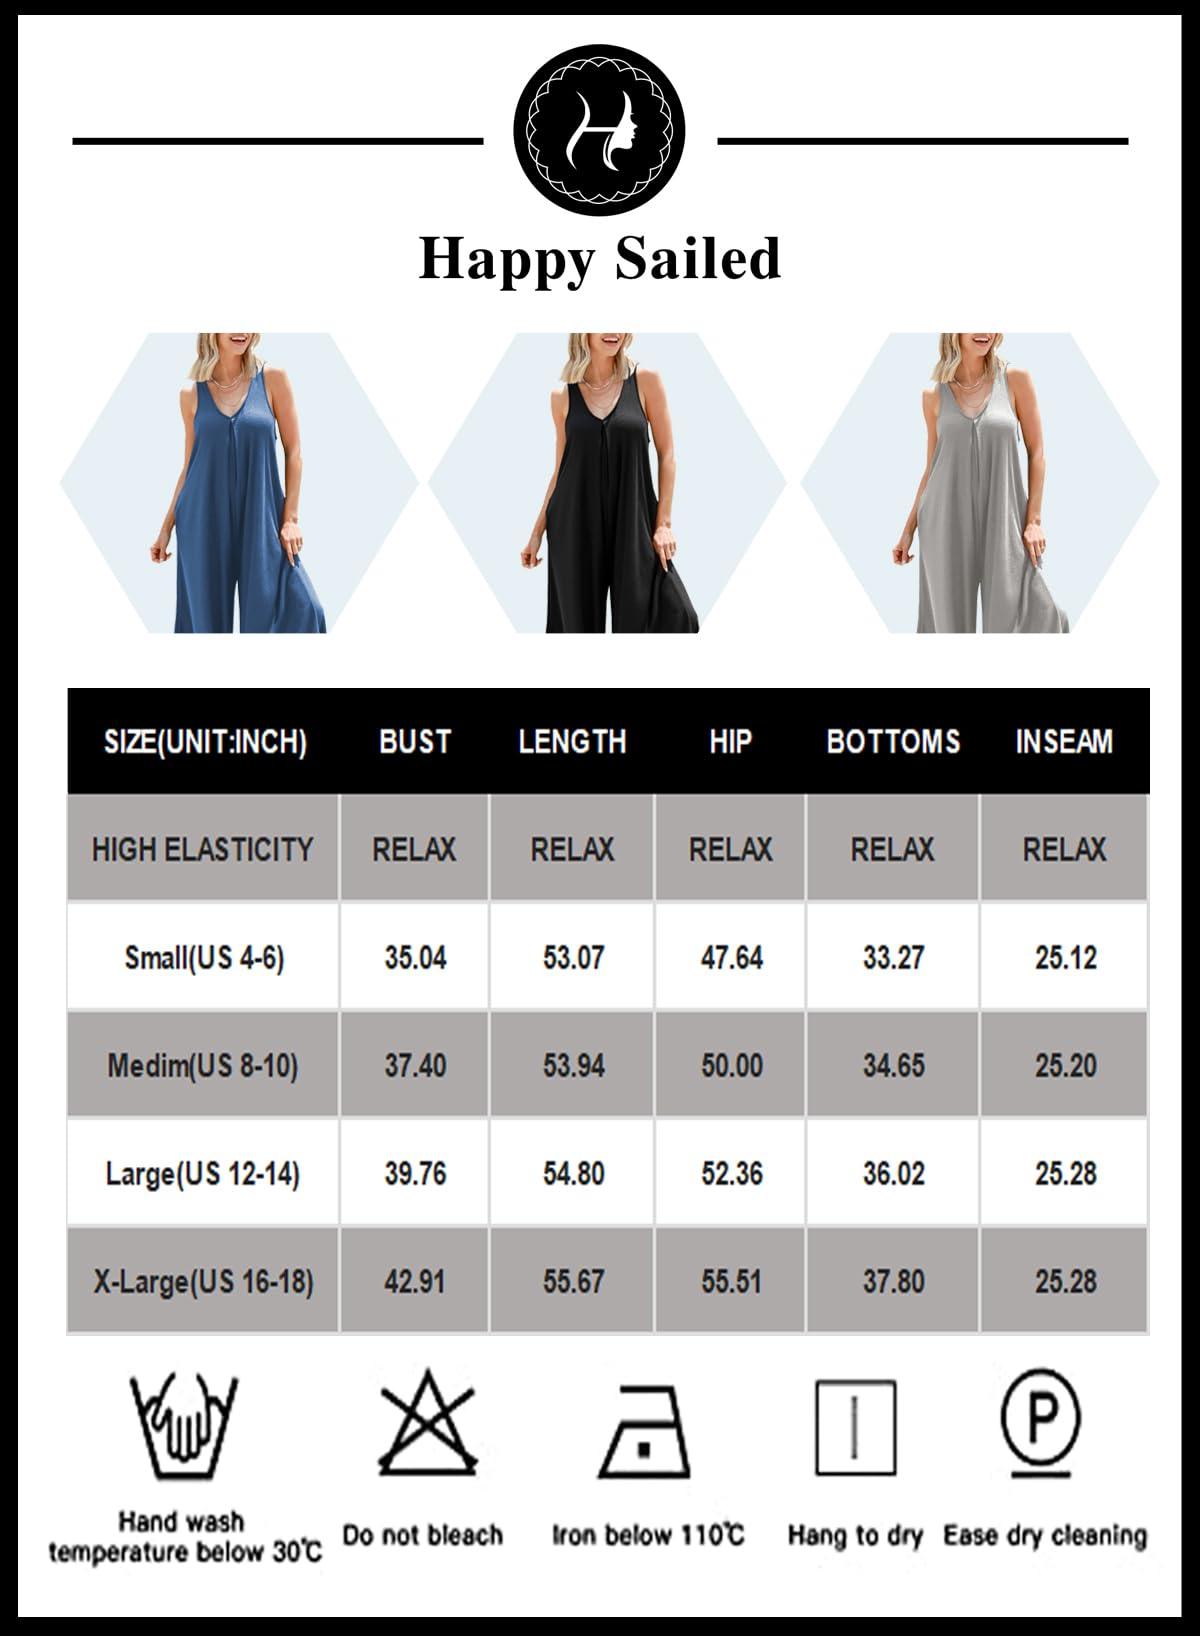 Happy Sailed Jumpsuits for Women Plus Size Casual Loose Fitting Wide Leg Romper Summer Sleeveless V Neck Ruched Stretchy Maternity Jumpsuit Light Grey Large - Bona Fide Fashion